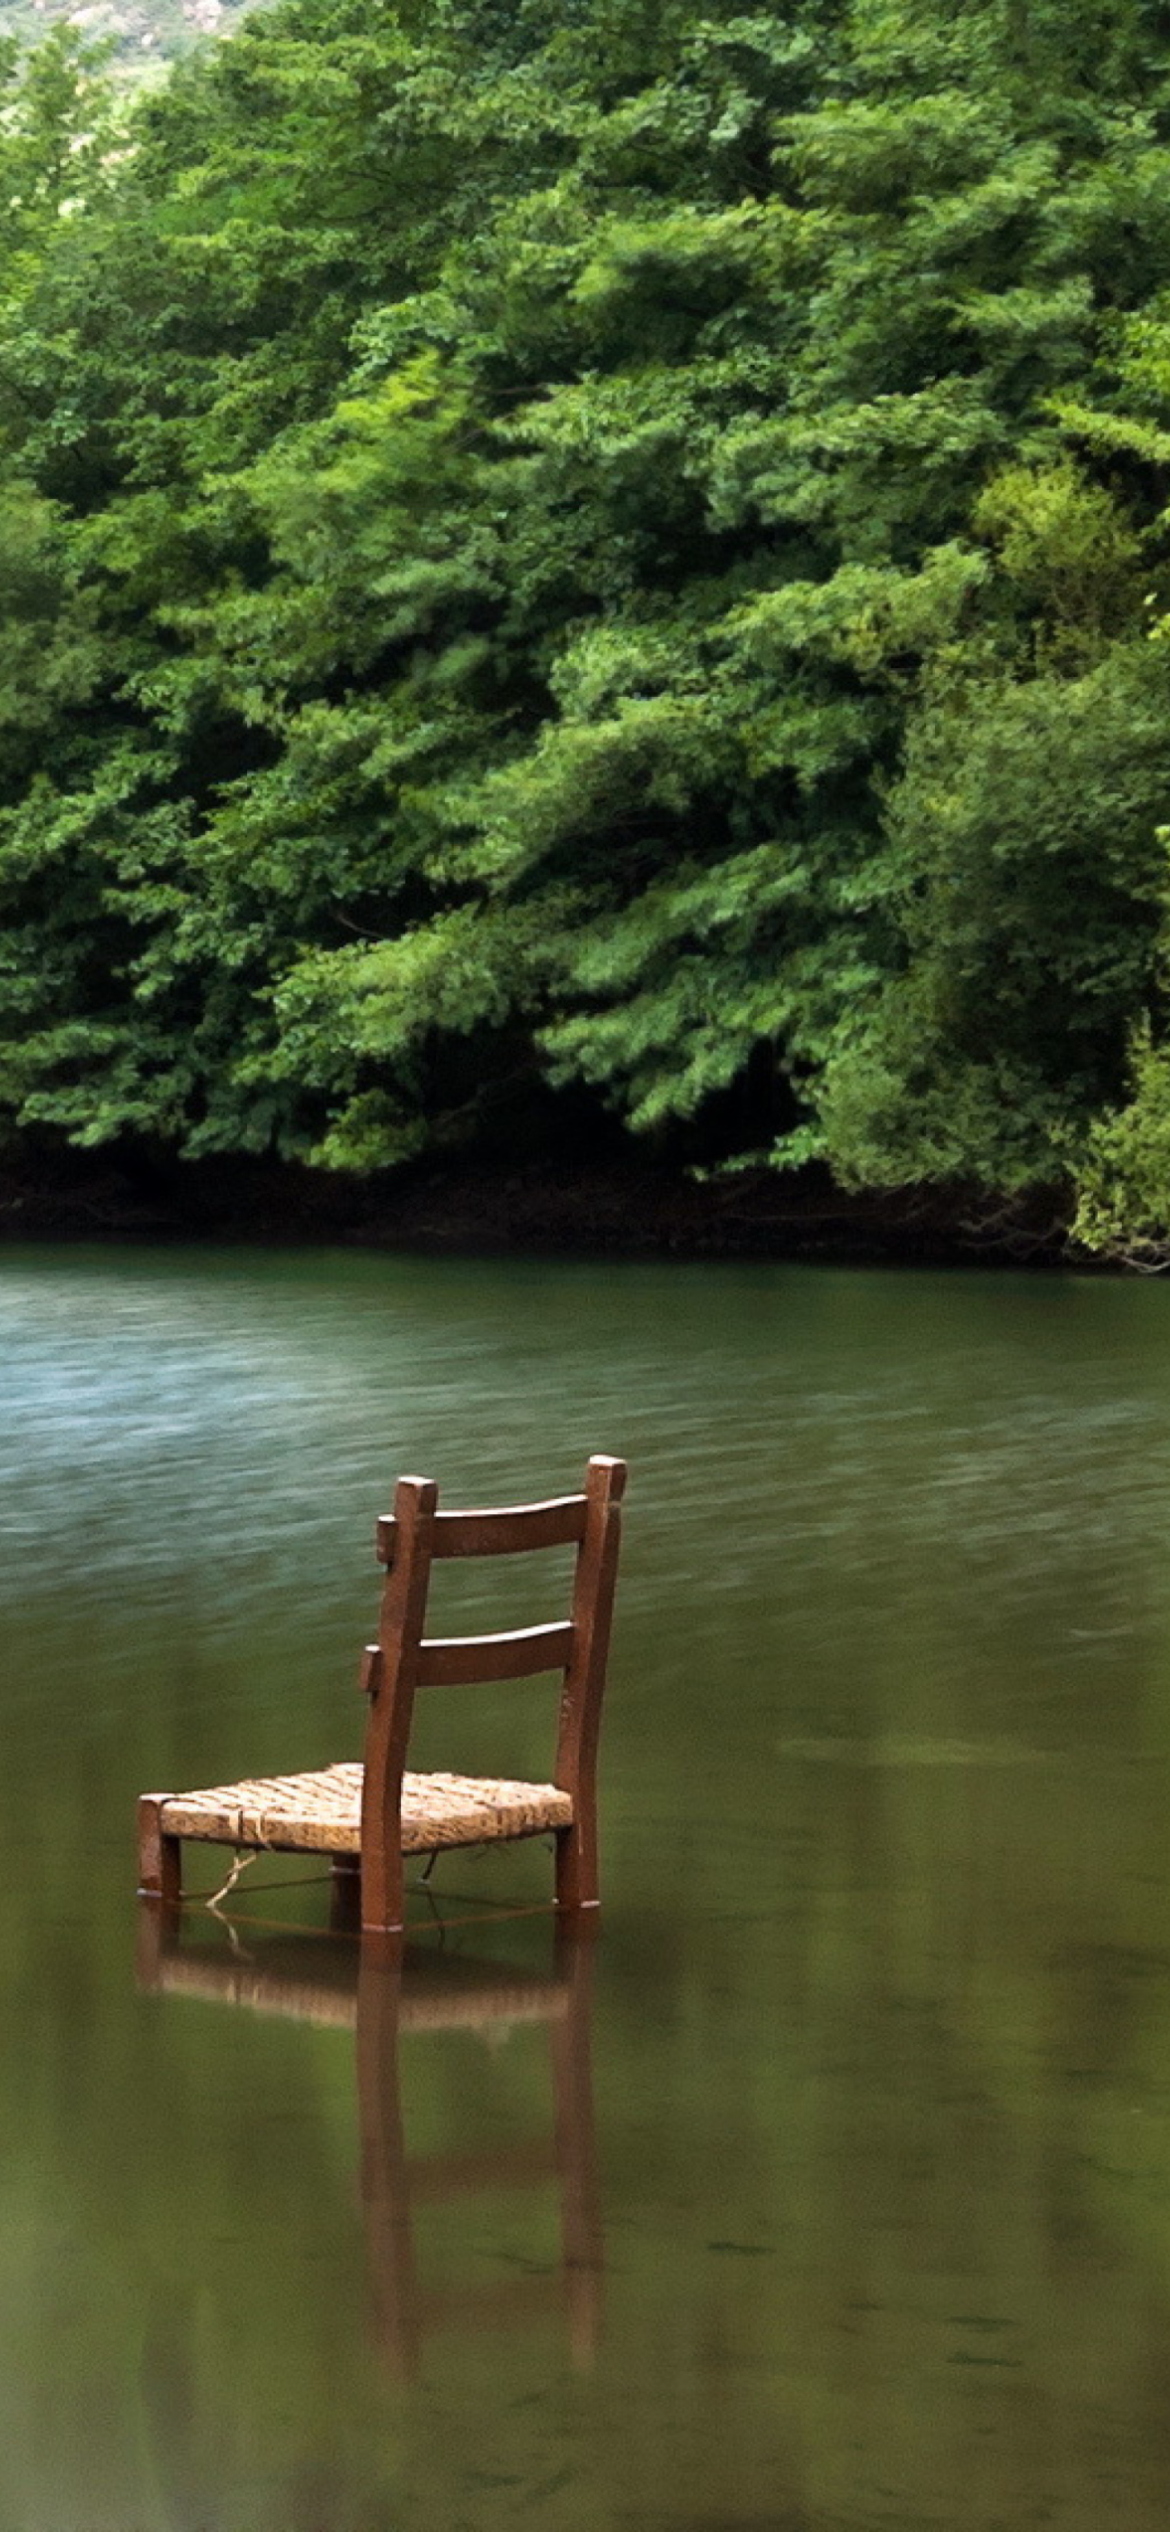 Das Chair In Middle Of Pieceful Lake Wallpaper 1170x2532